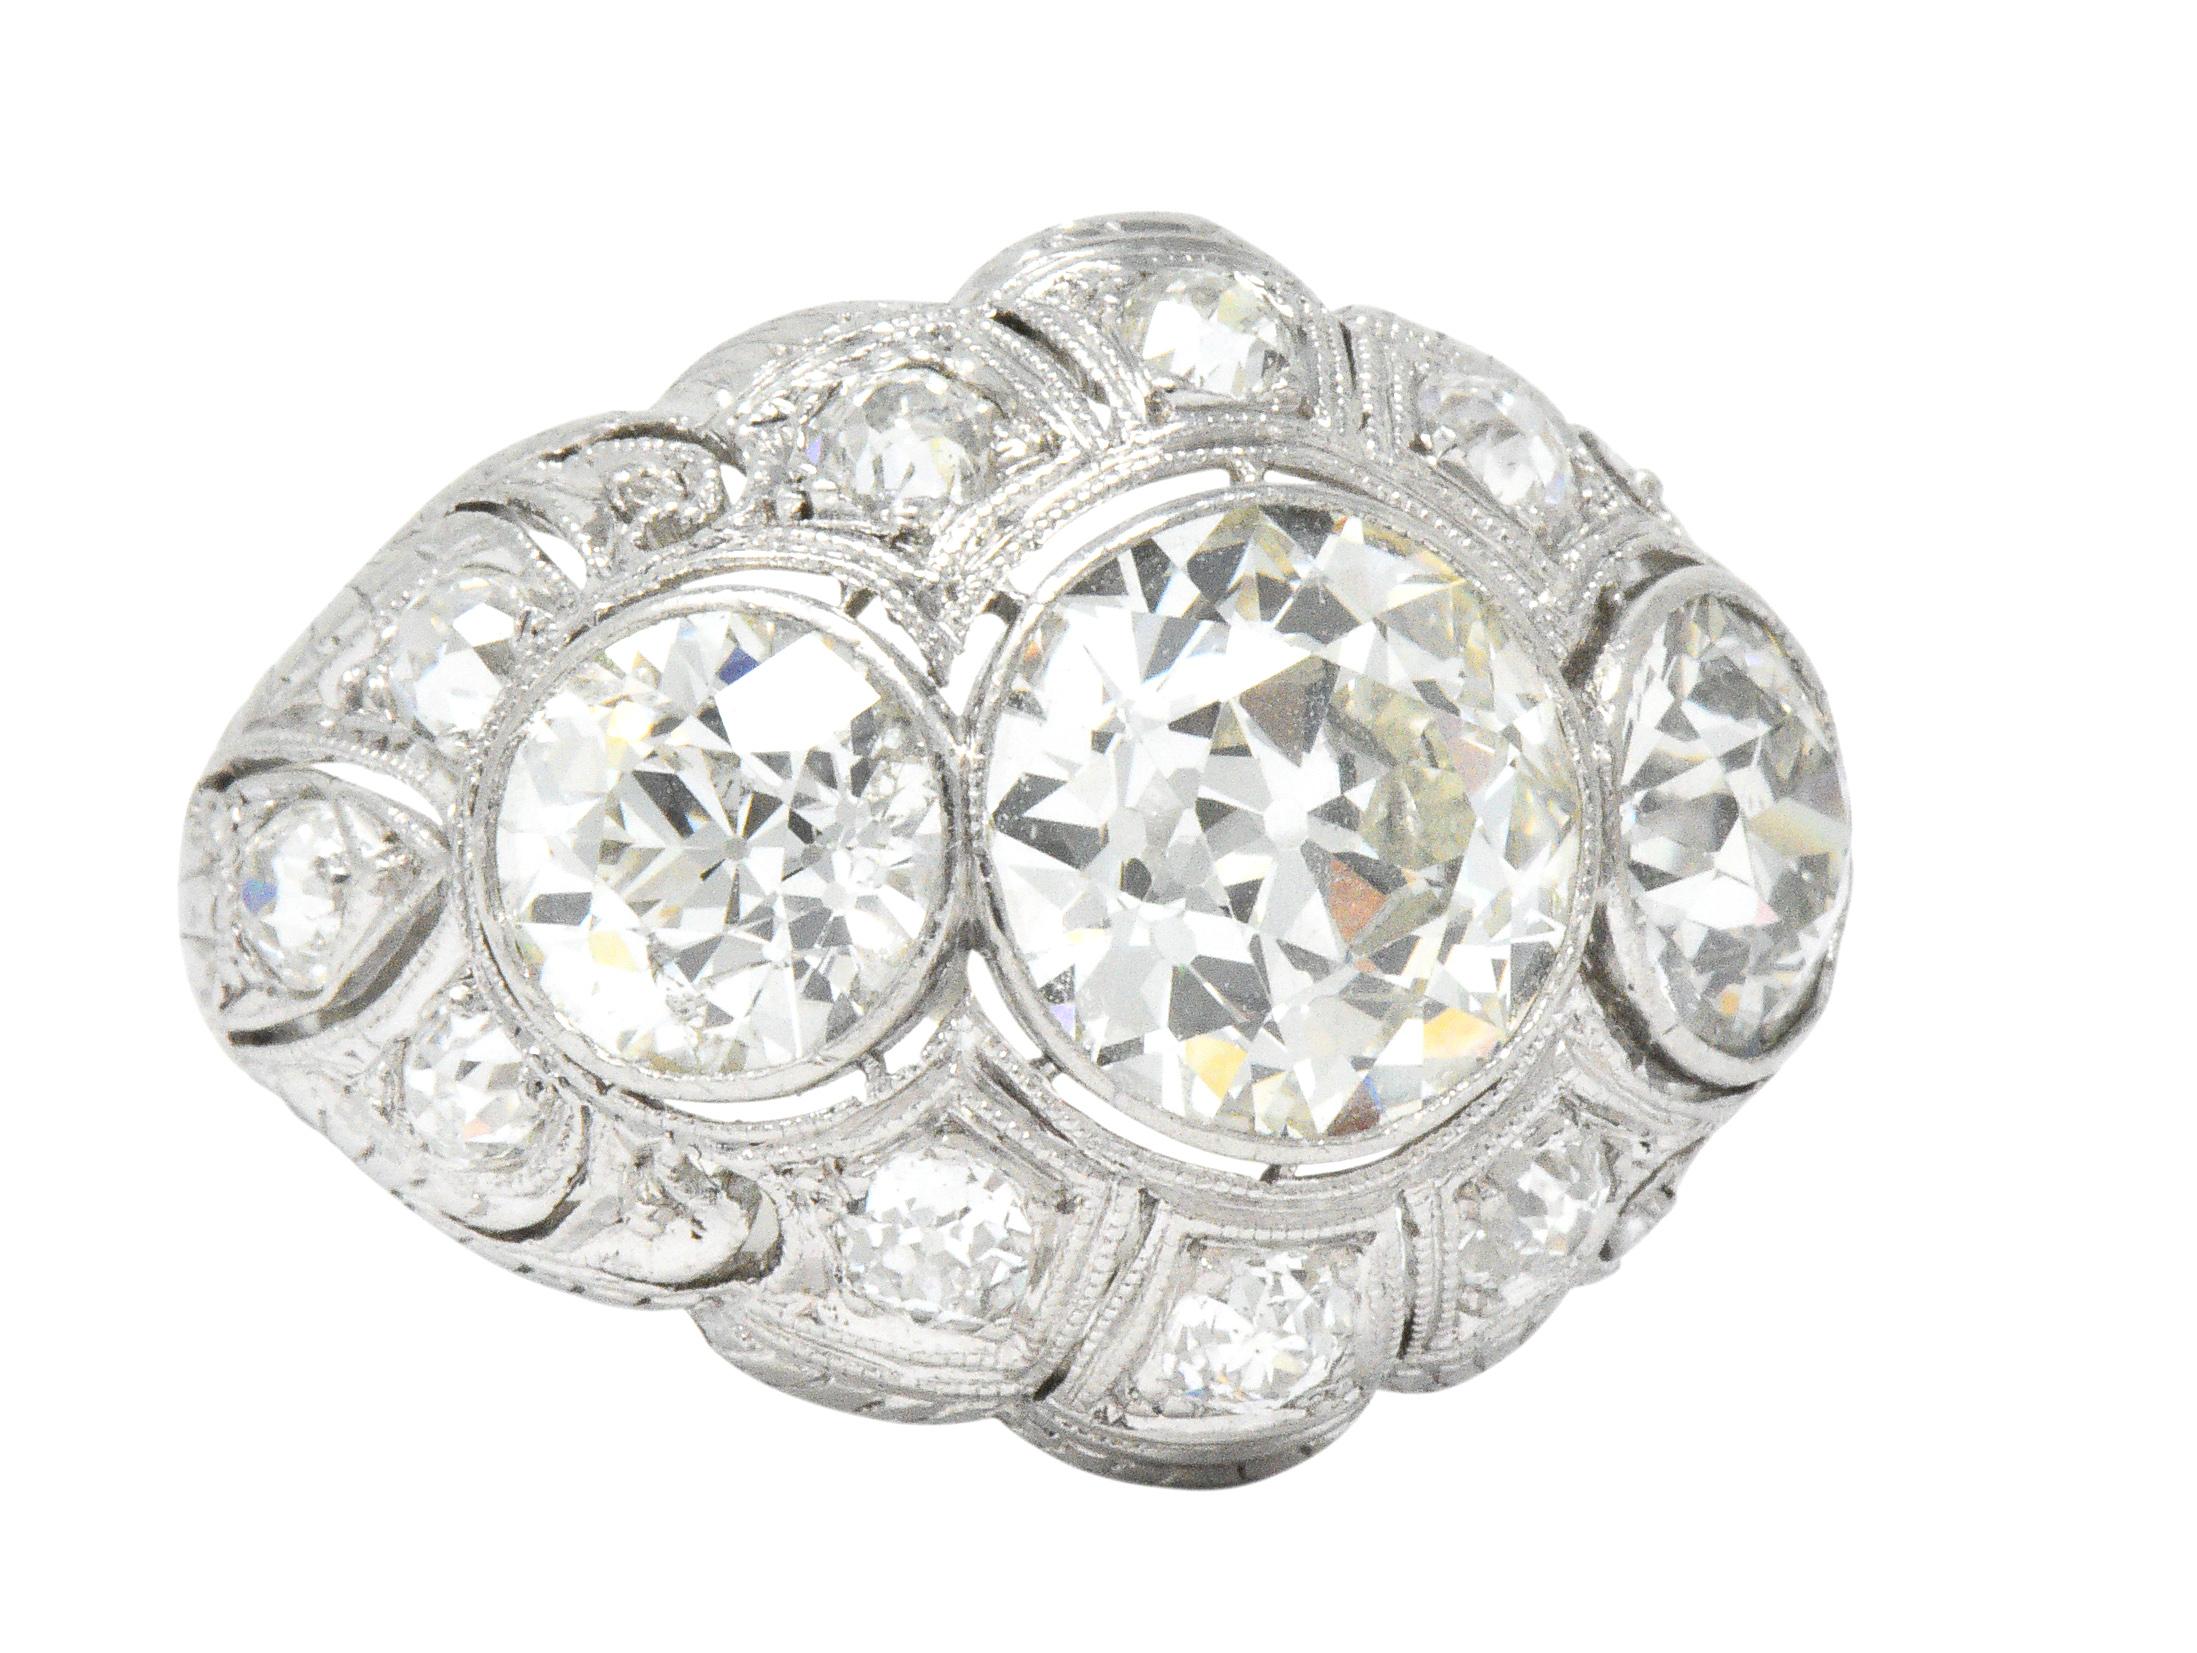 Pierced bombay style mounting with milgrain edges centers an old European cut diamond weighing approximately 2.50 carats, J color with VS clarity

Flanked by two additional old European cut diamonds weighing approximately 1.10 and 1.00 carats; both